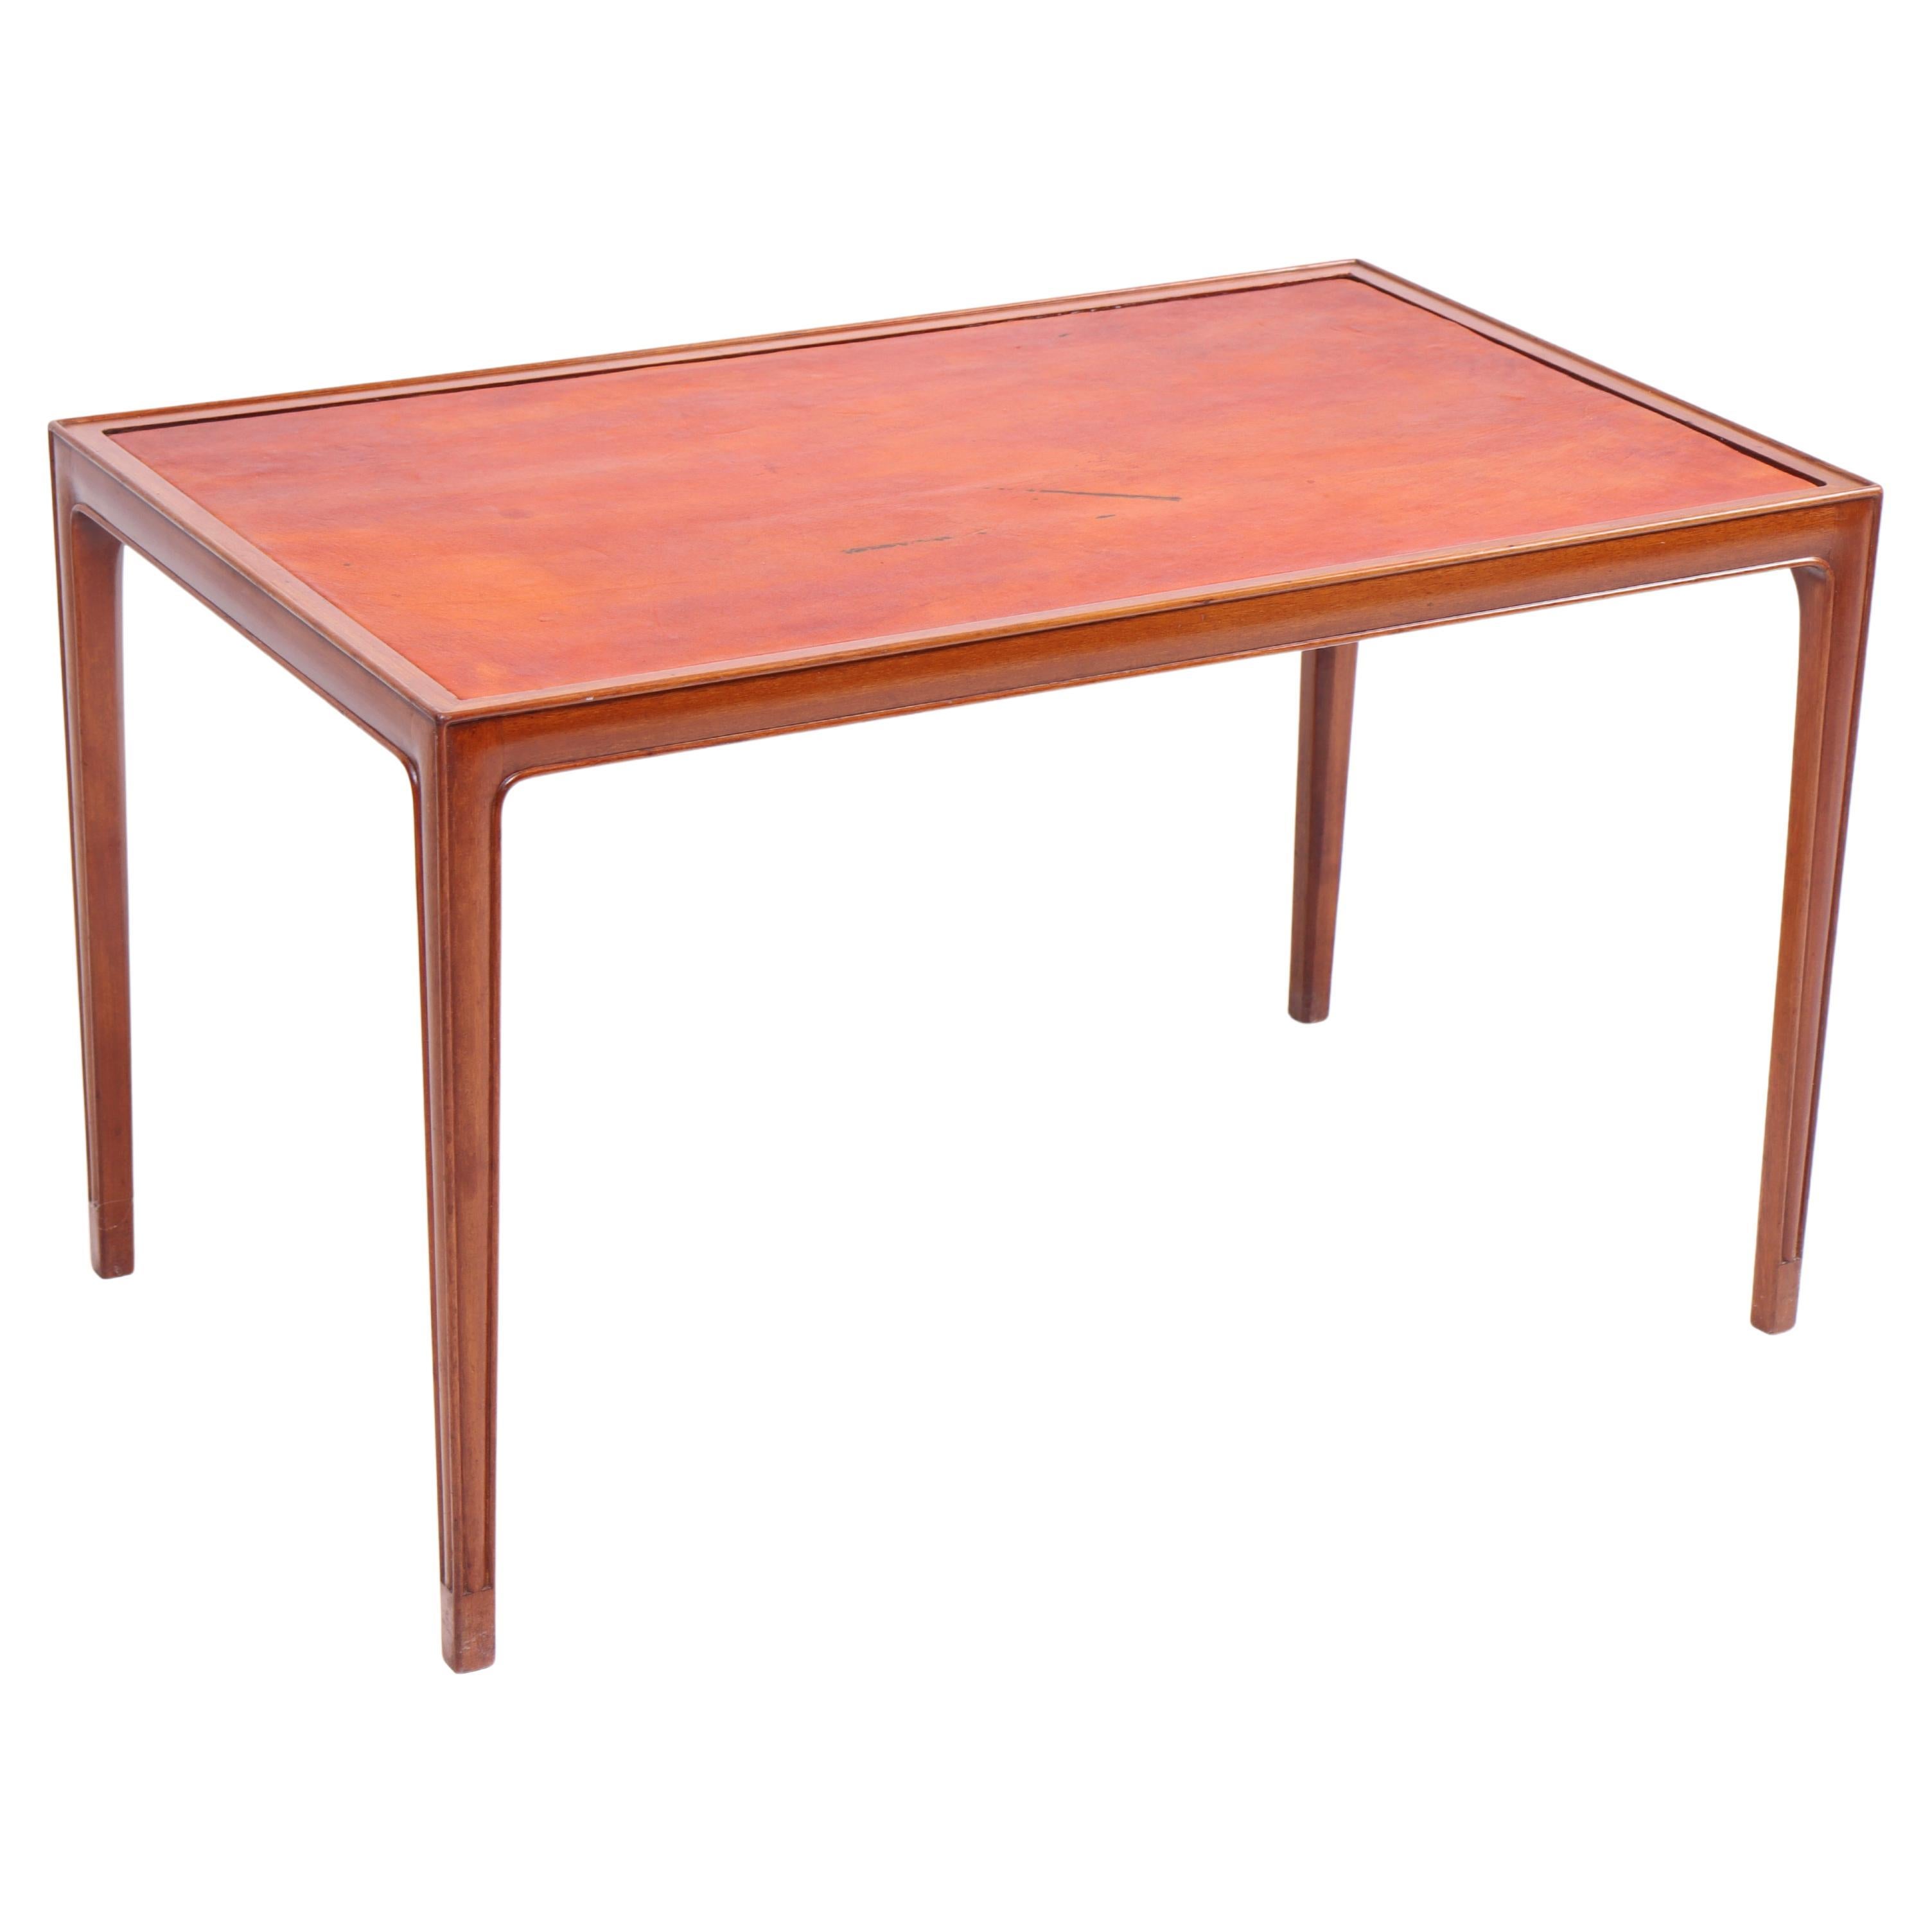 Low Table in Mahogany and Patinated Leather, Danish Cabinetmaker 1950s For Sale